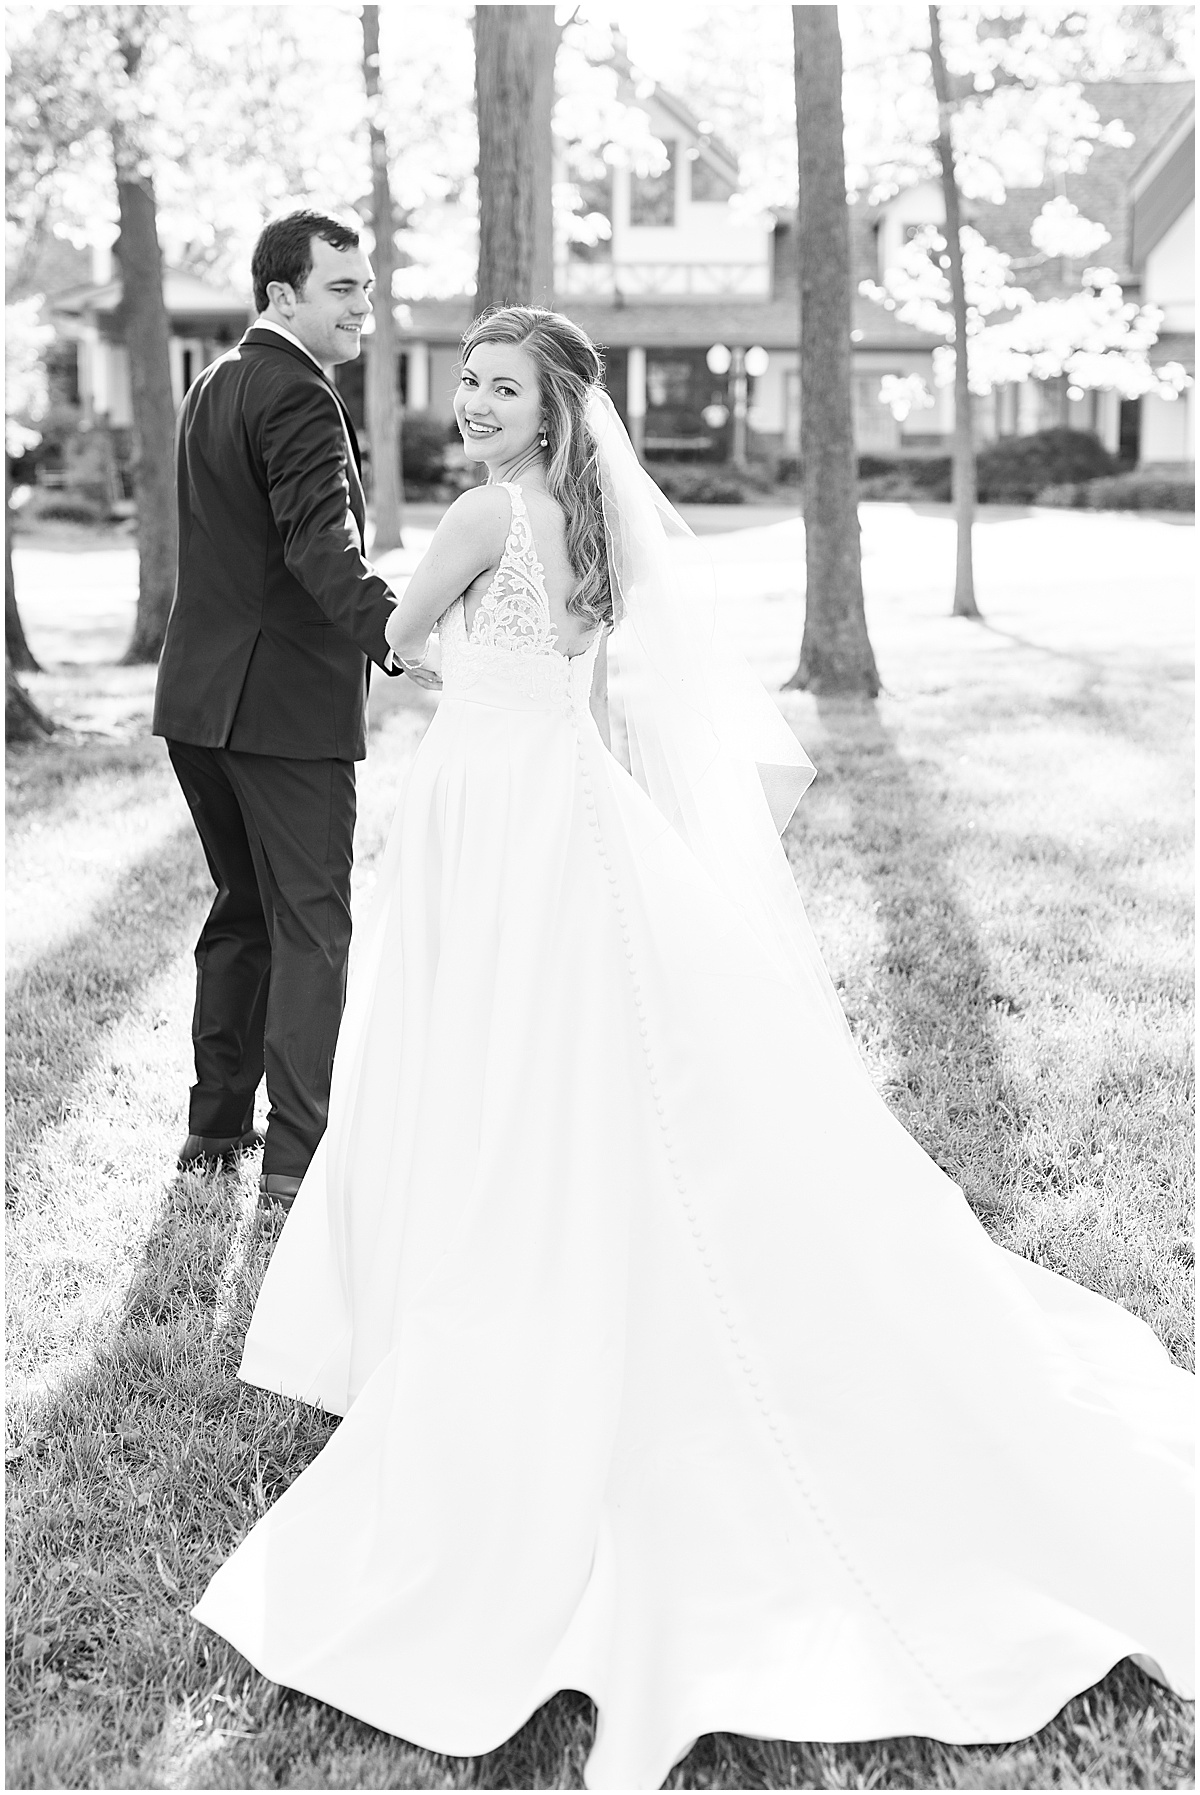 Bride and groom at Lizton Lodge wedding in Lizton, Indiana photographed by Lafayette, Indiana wedding photographer Victoria Rayburn Photography